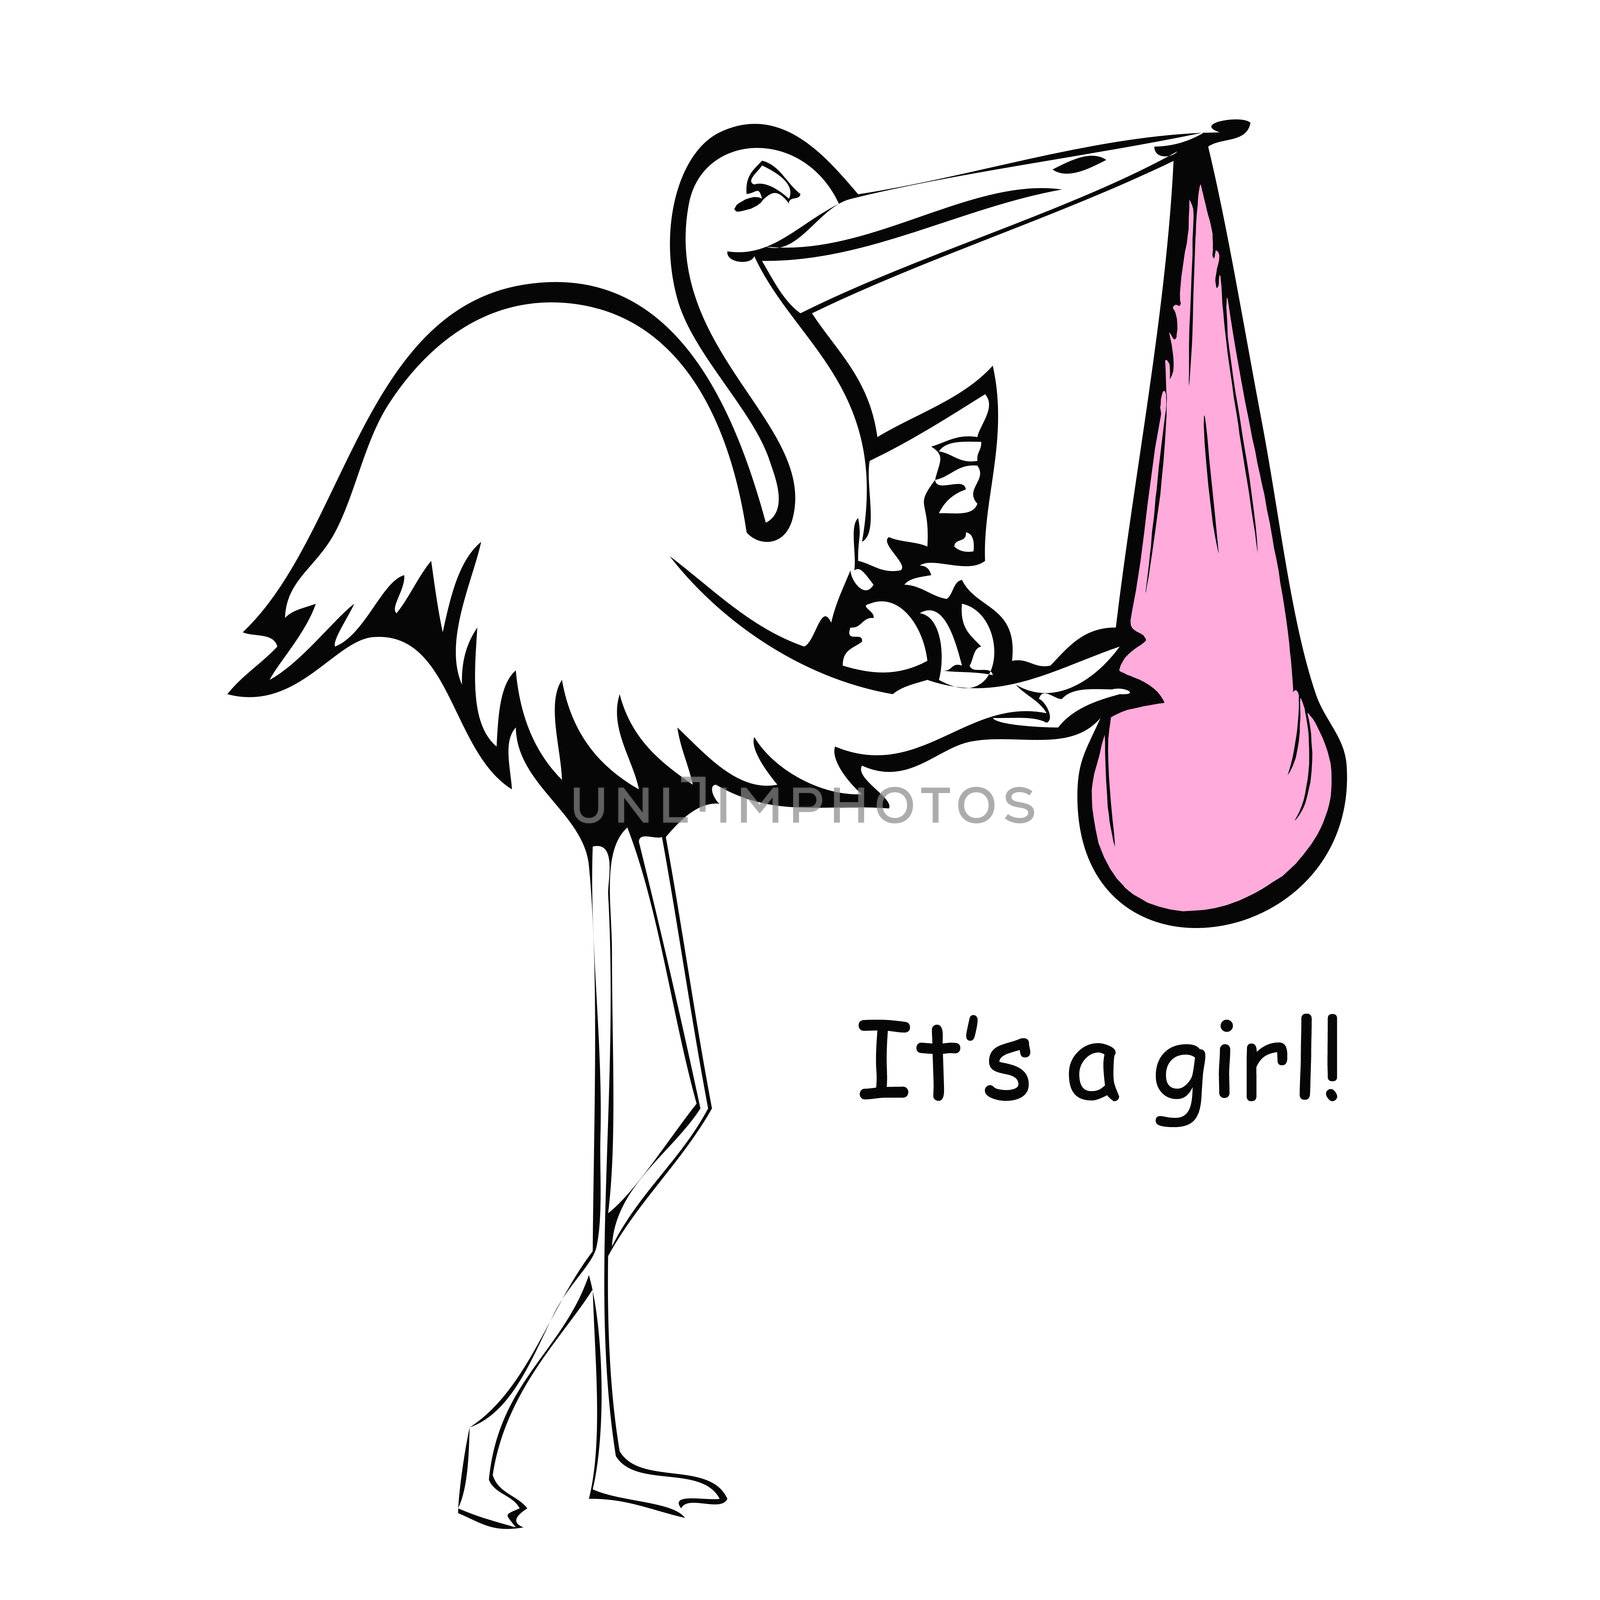 stork delivers baby girl...great for t-shirts, birth announcements etc